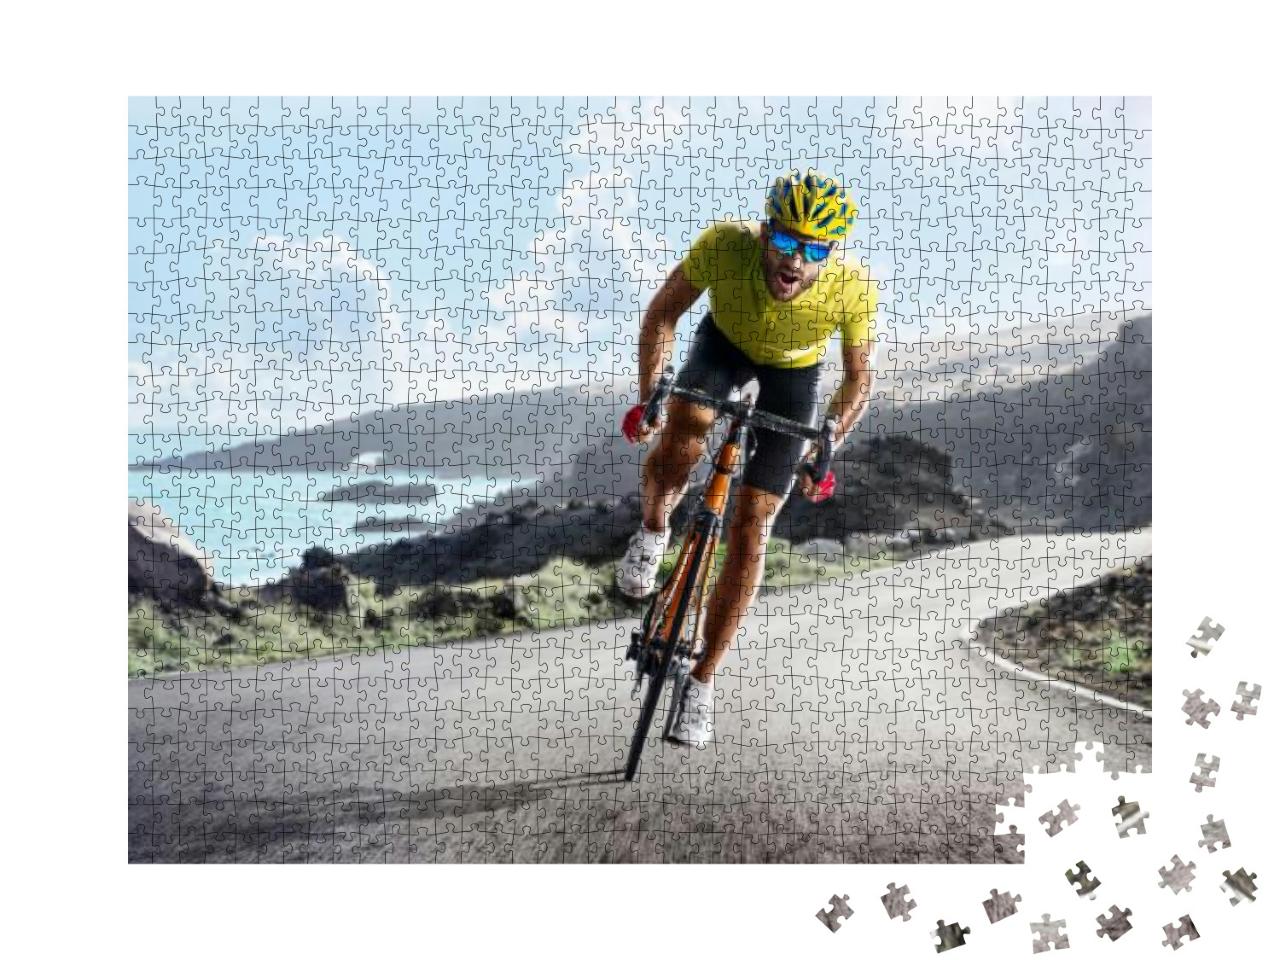 Professional Road Bicycle Racer in Action... Jigsaw Puzzle with 1000 pieces